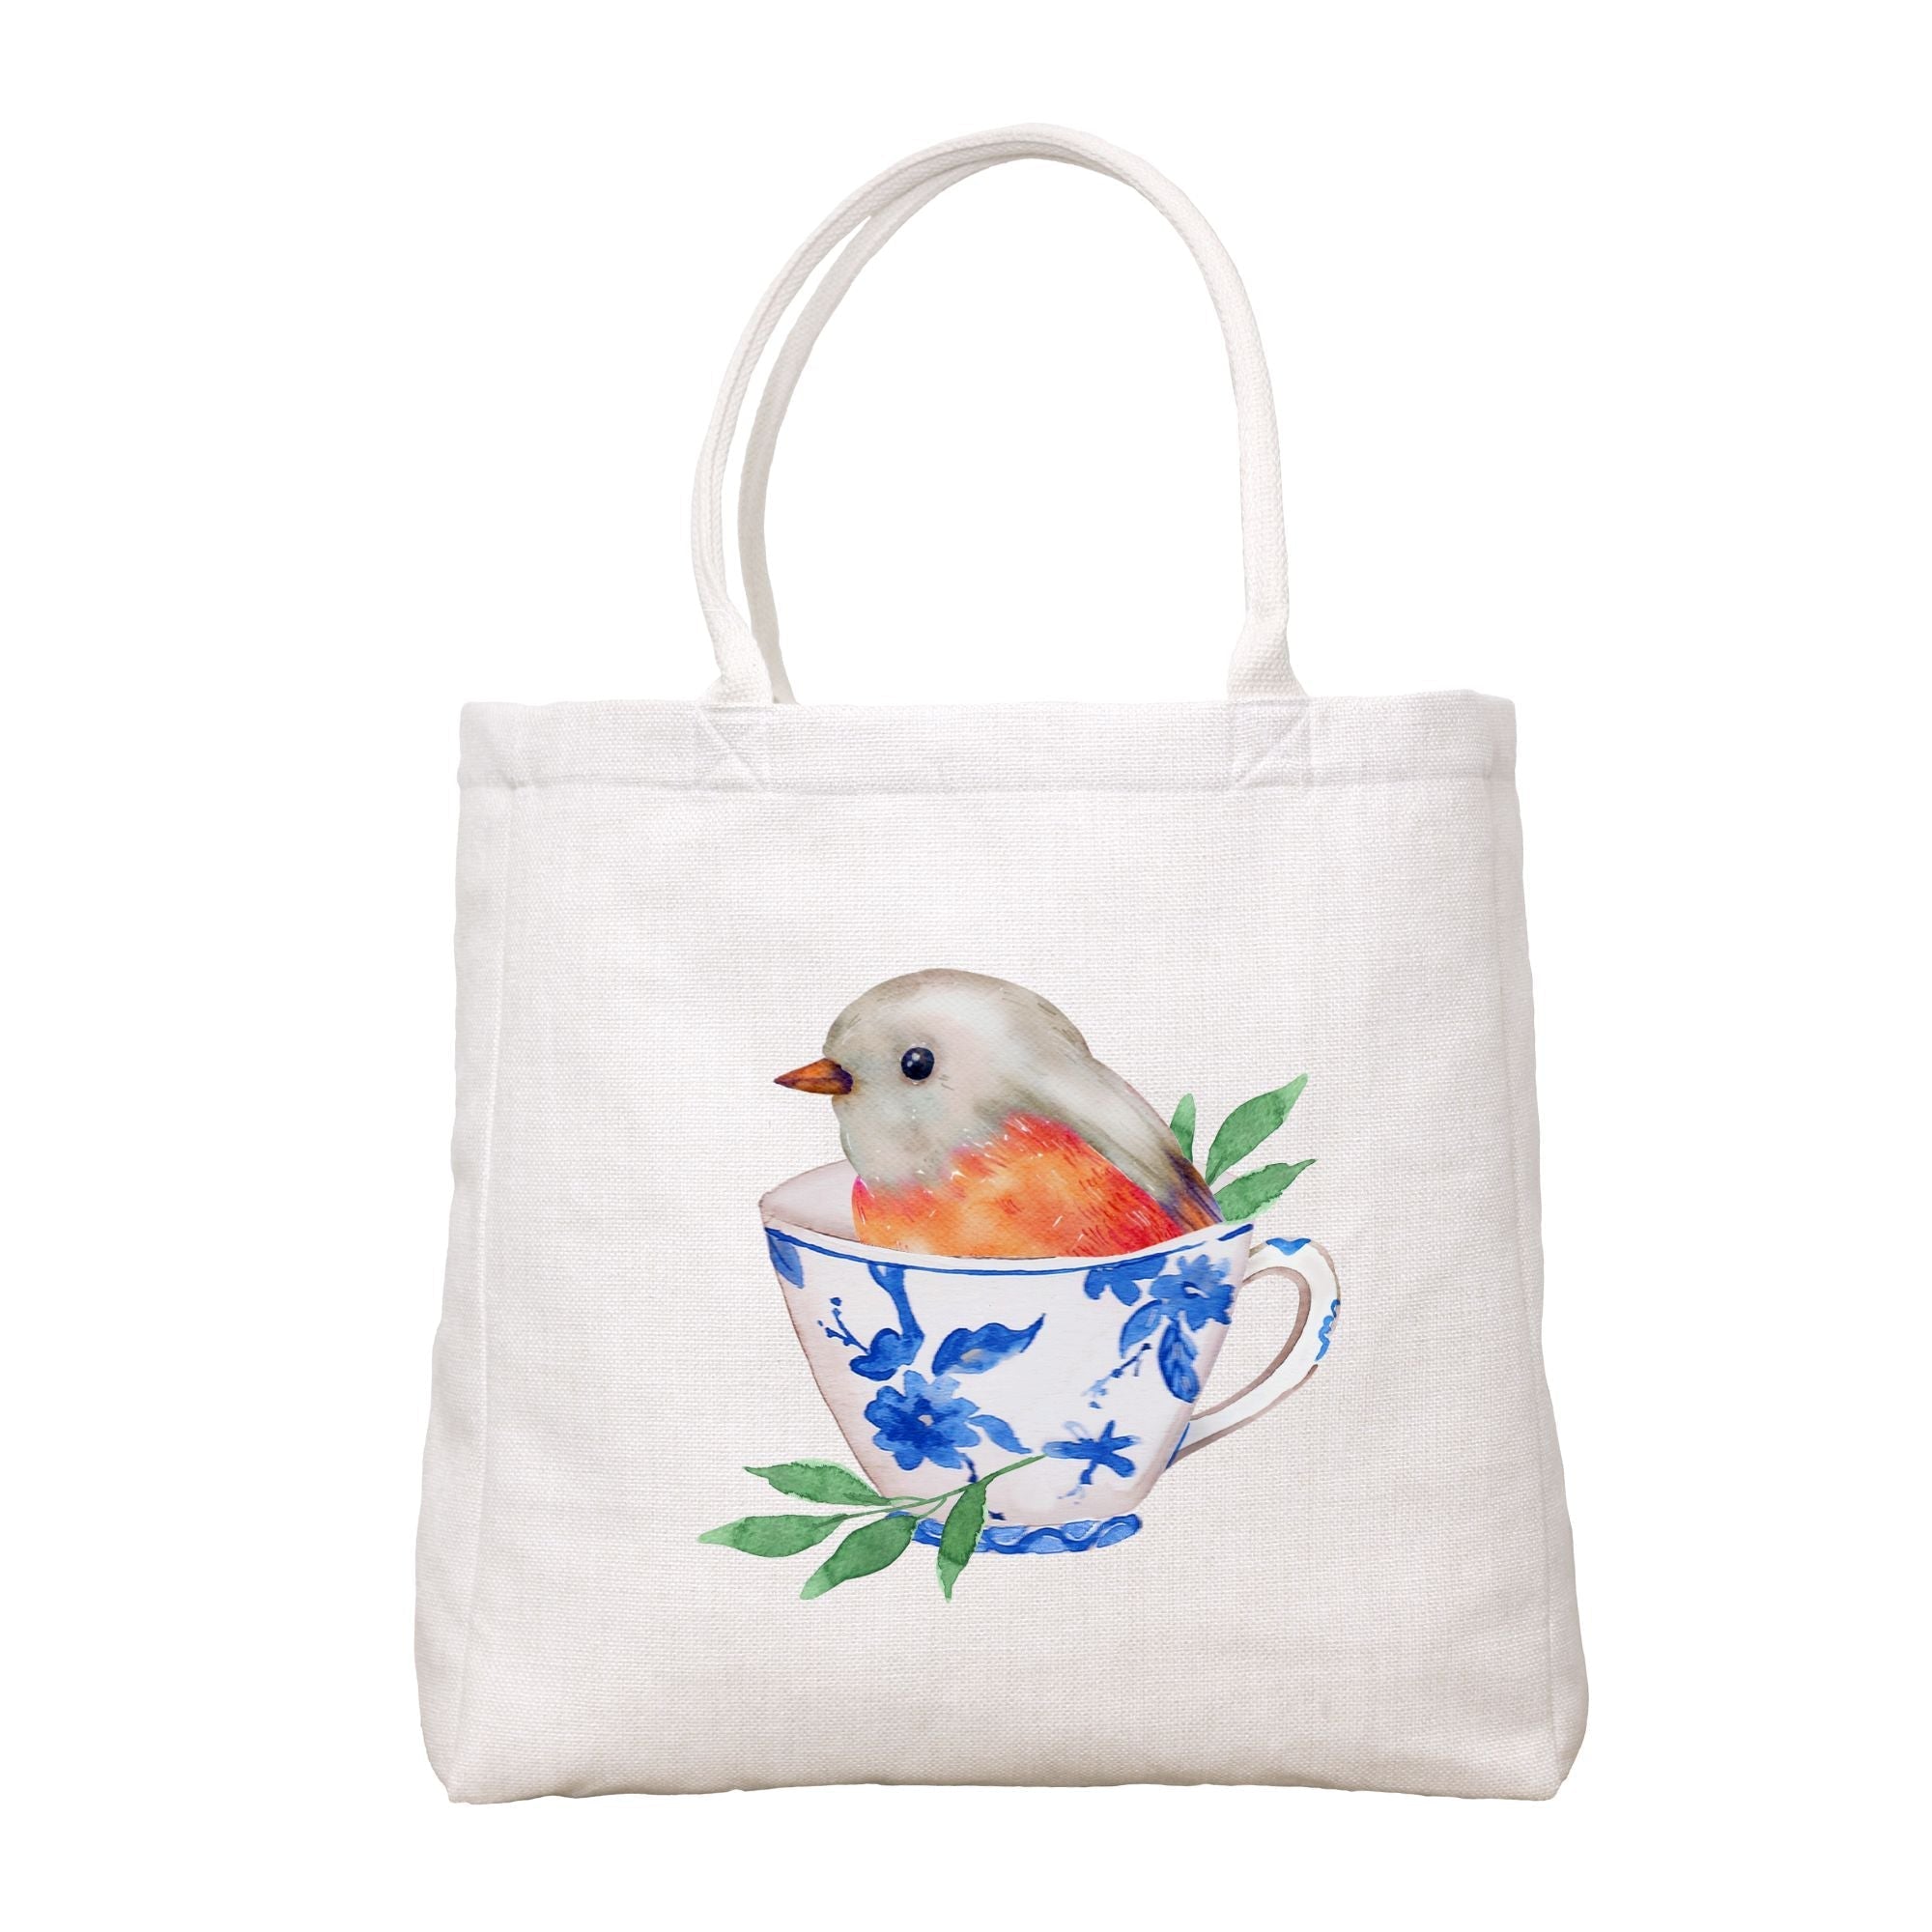 Blue And White Teacup And Bird Tote Bag